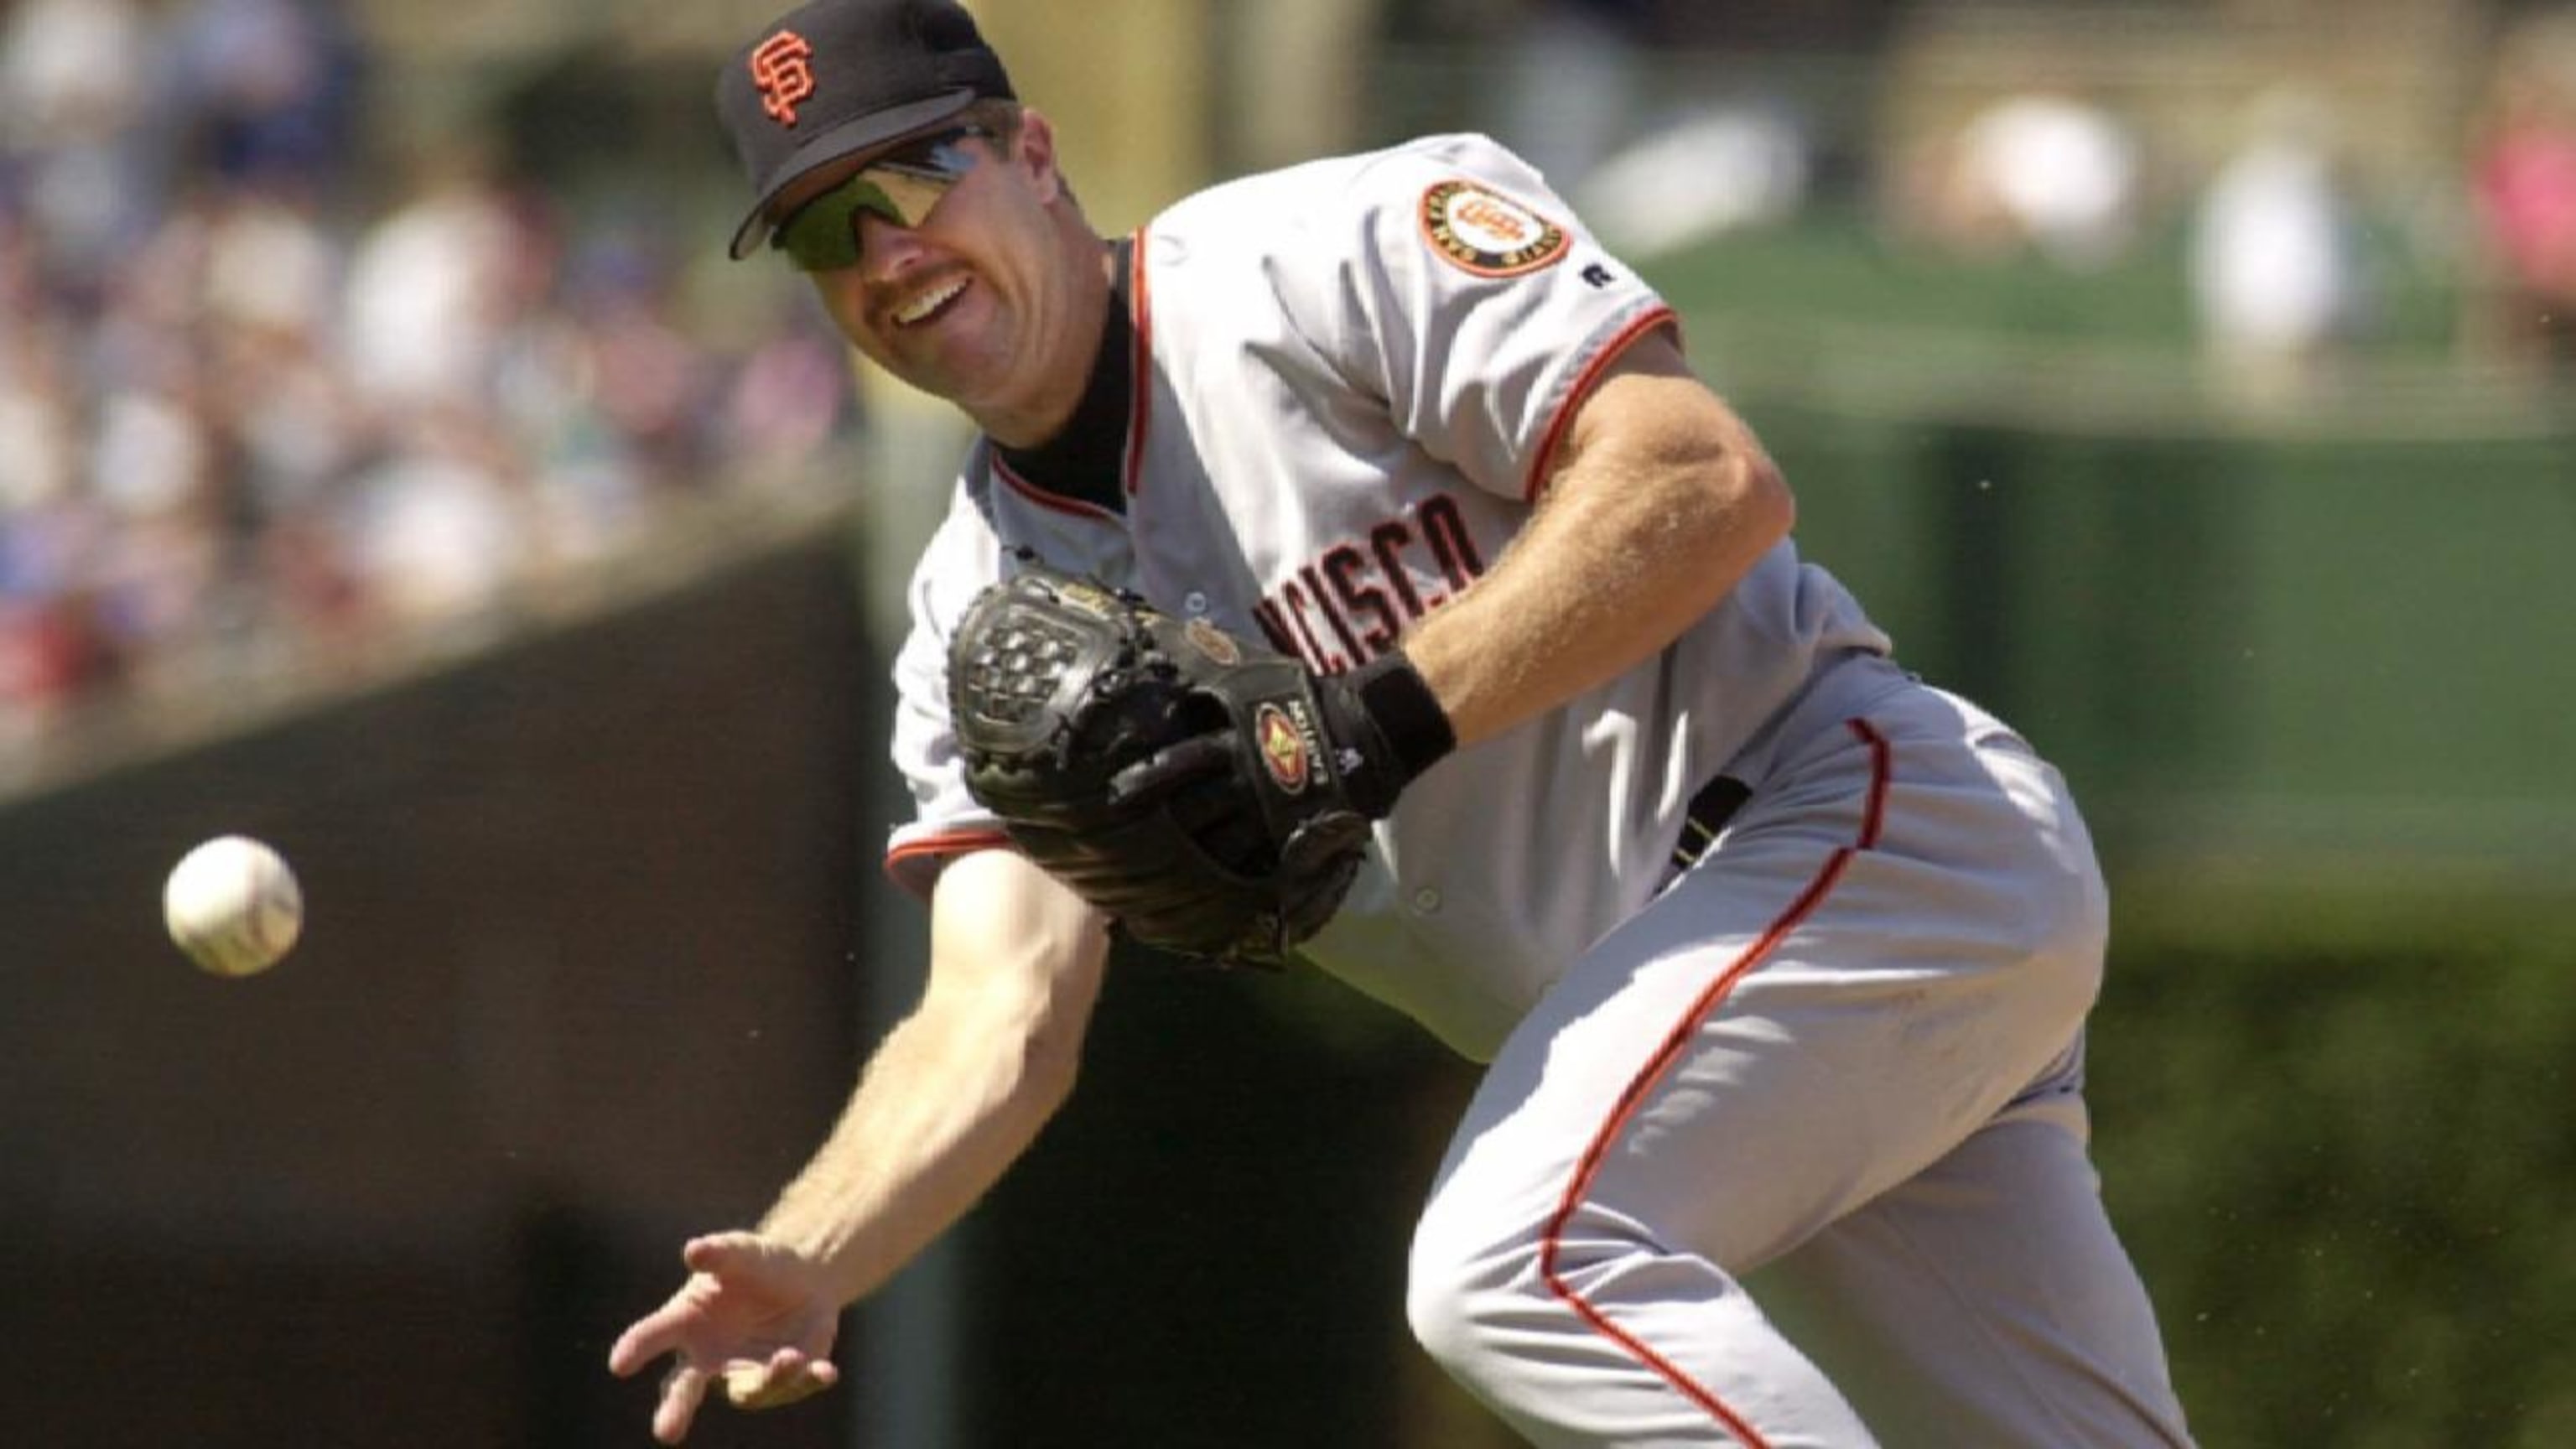 Hall of Fame case for Jeff Kent